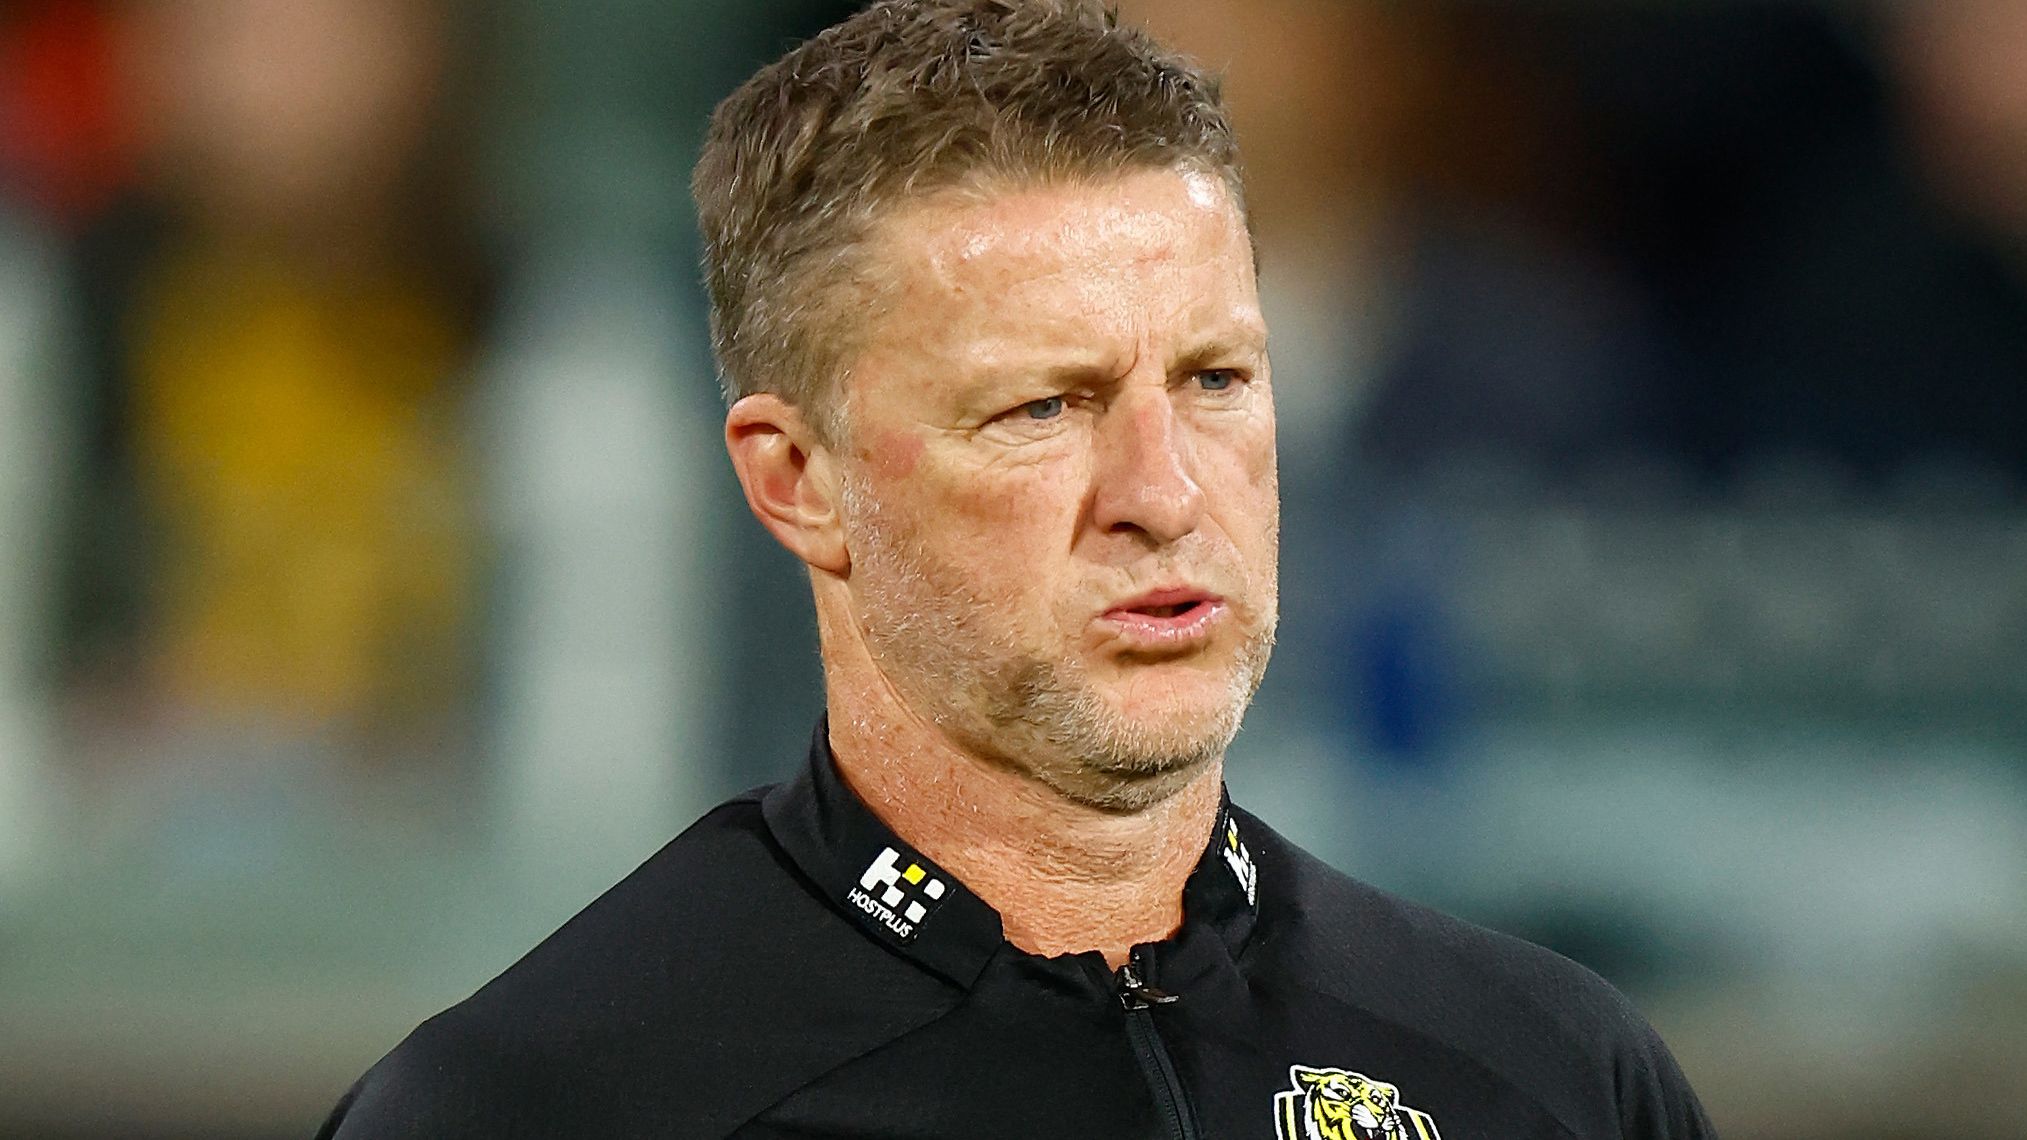 Damien Hardwick's shock decision to quit labelled 'a crisis for the industry'